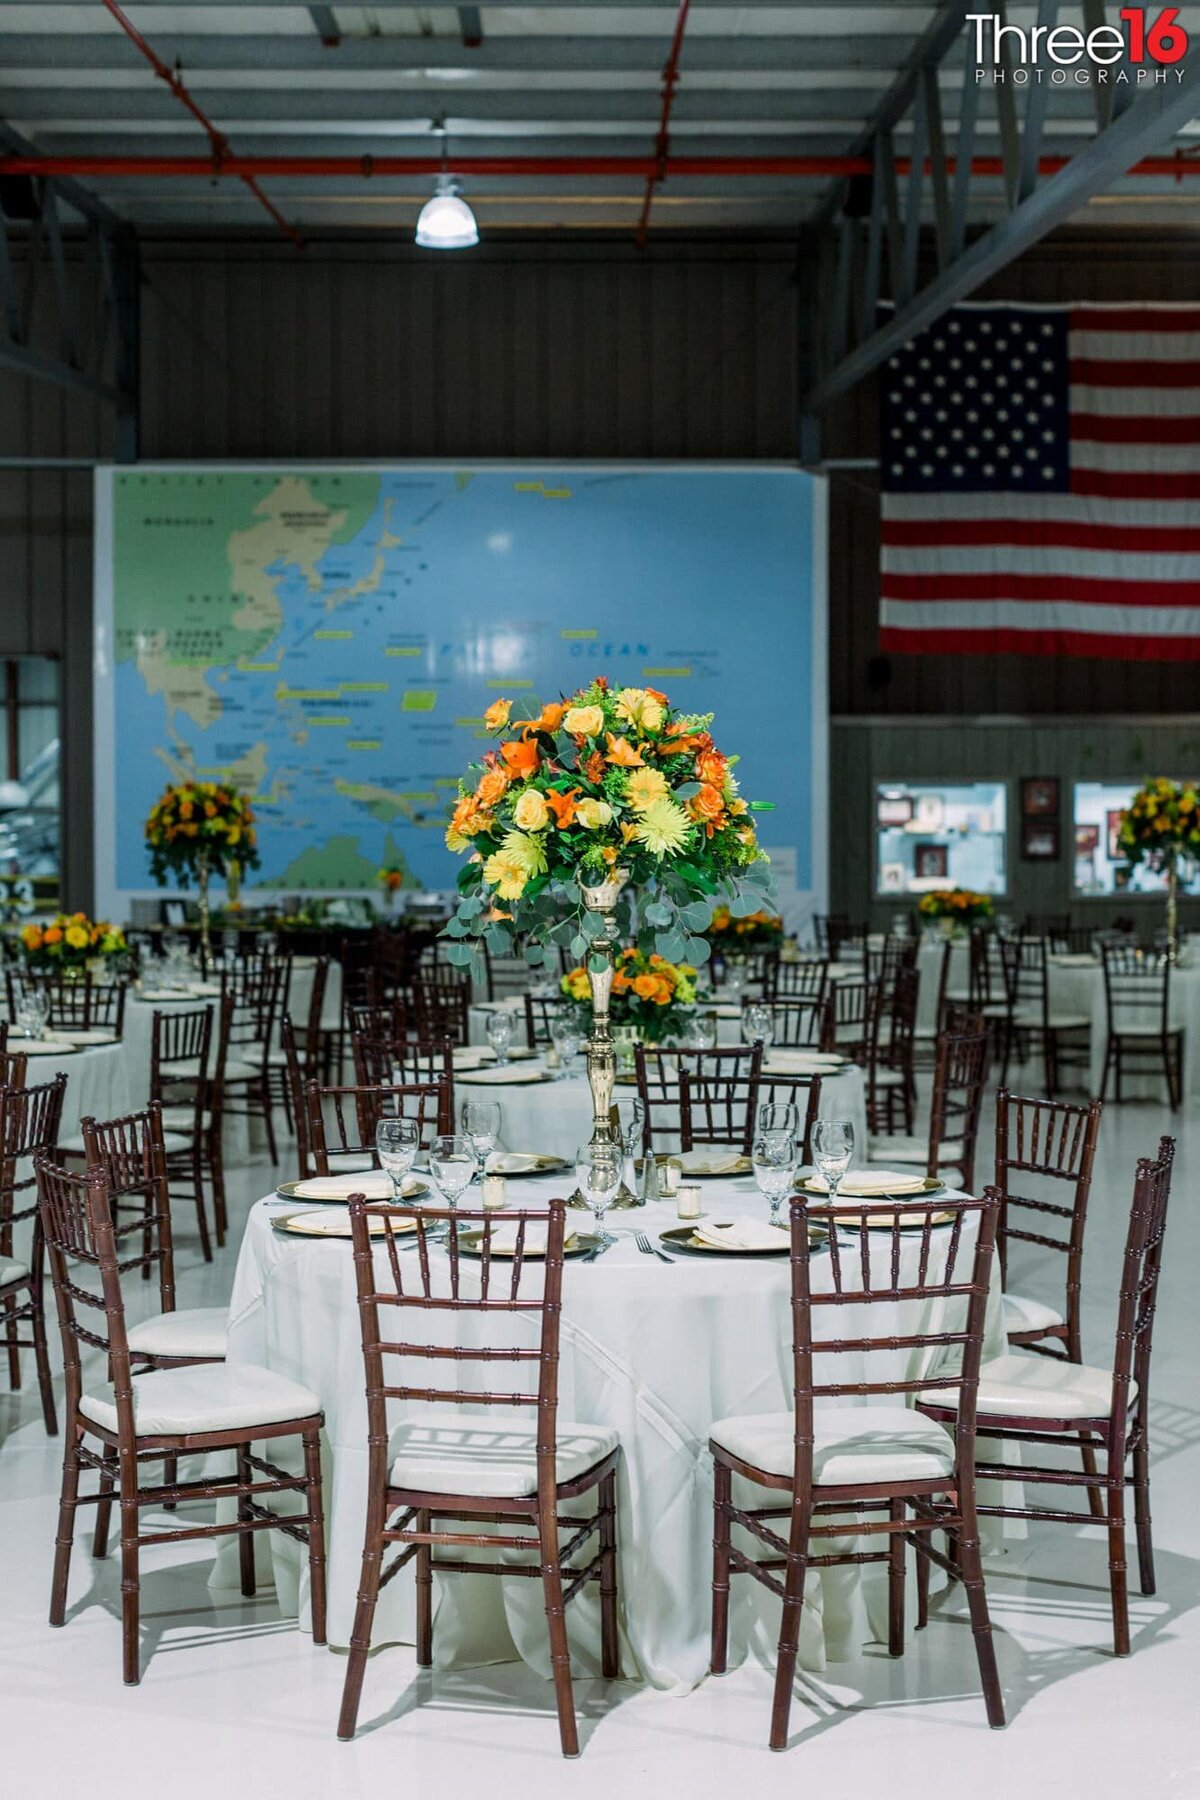 Wedding Reception room setup at the Planes of Fame Air Museum